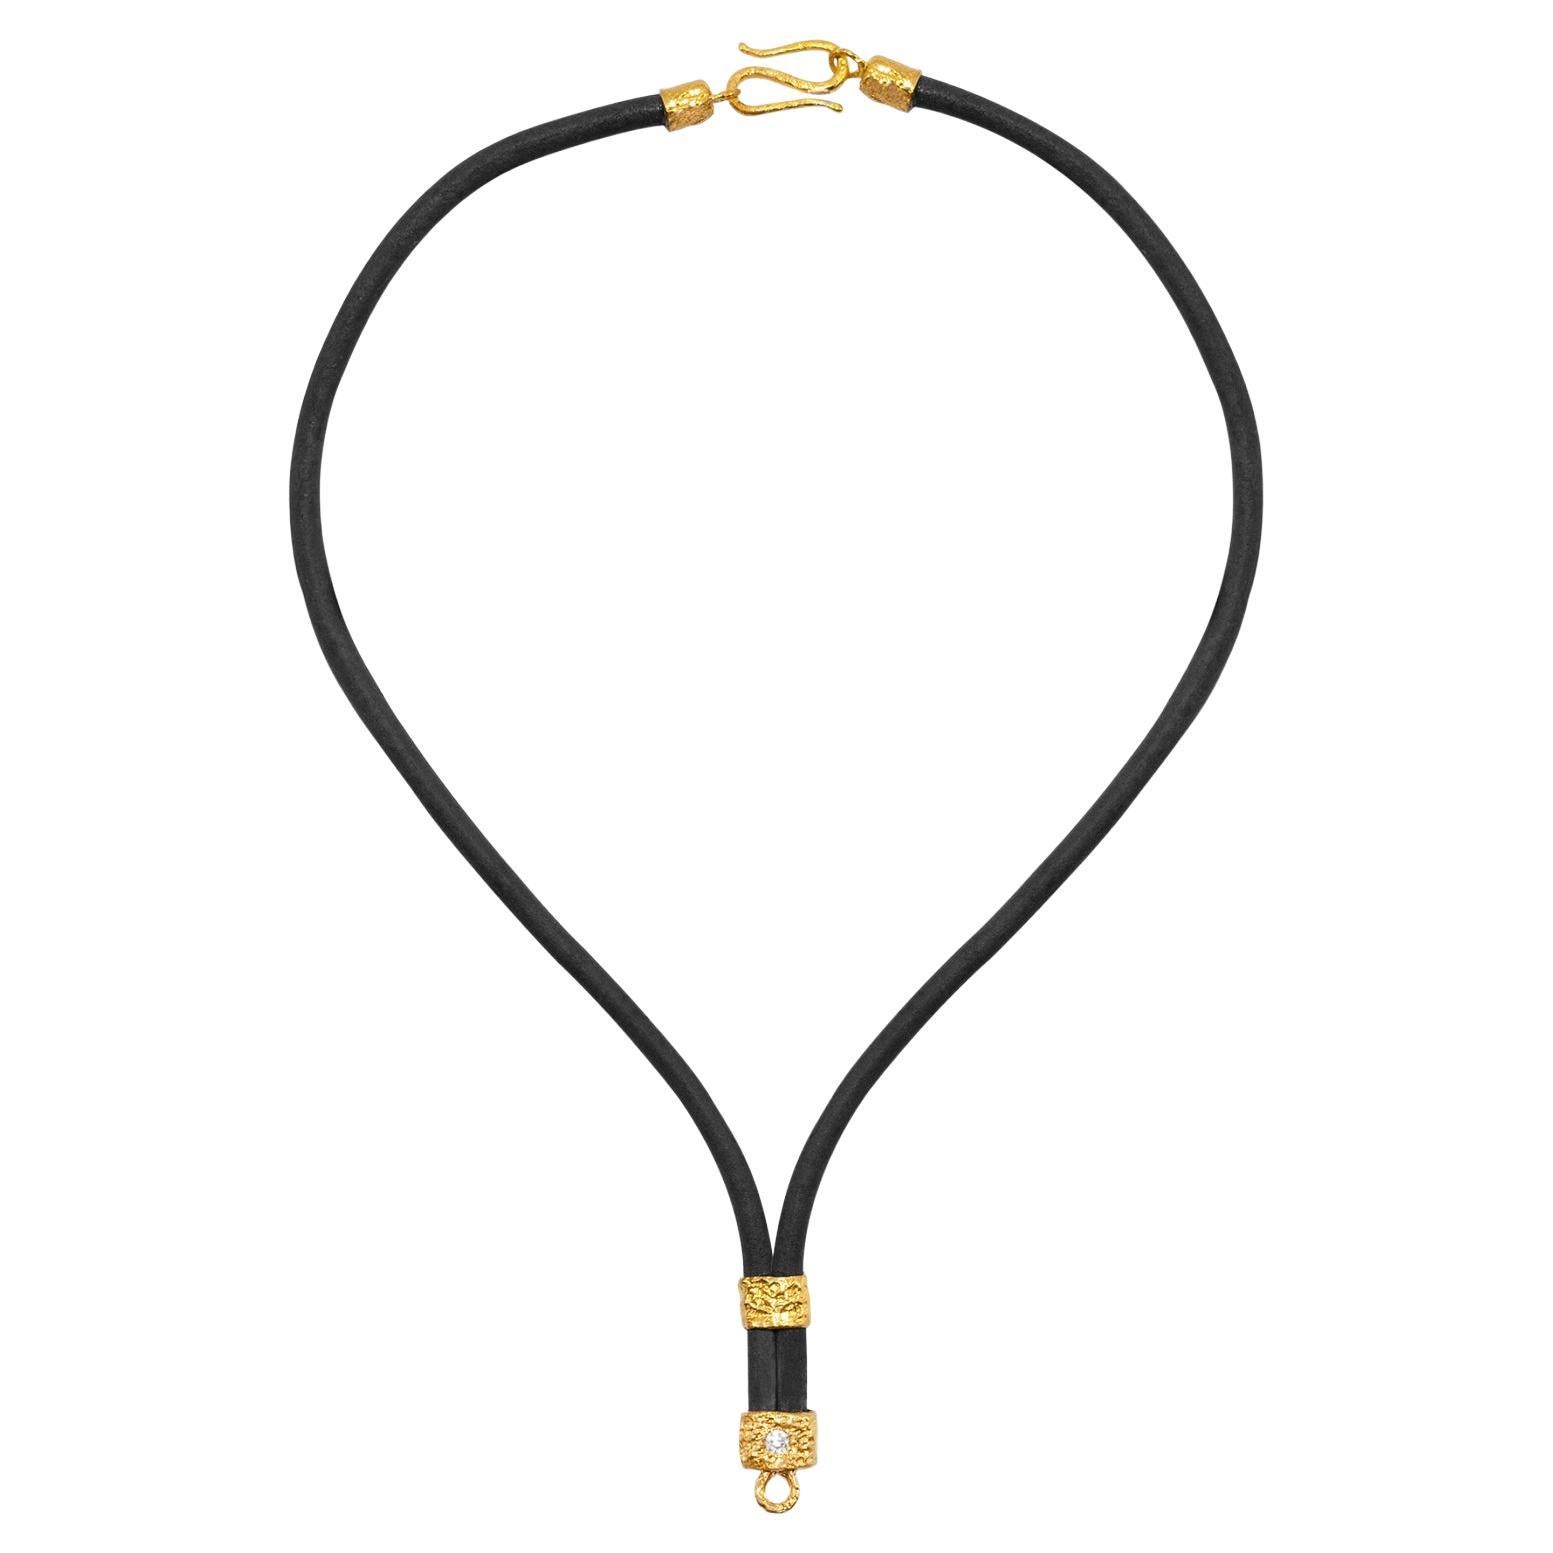 Allegra Leather and 22k Gold Necklace in Black, by Tagili